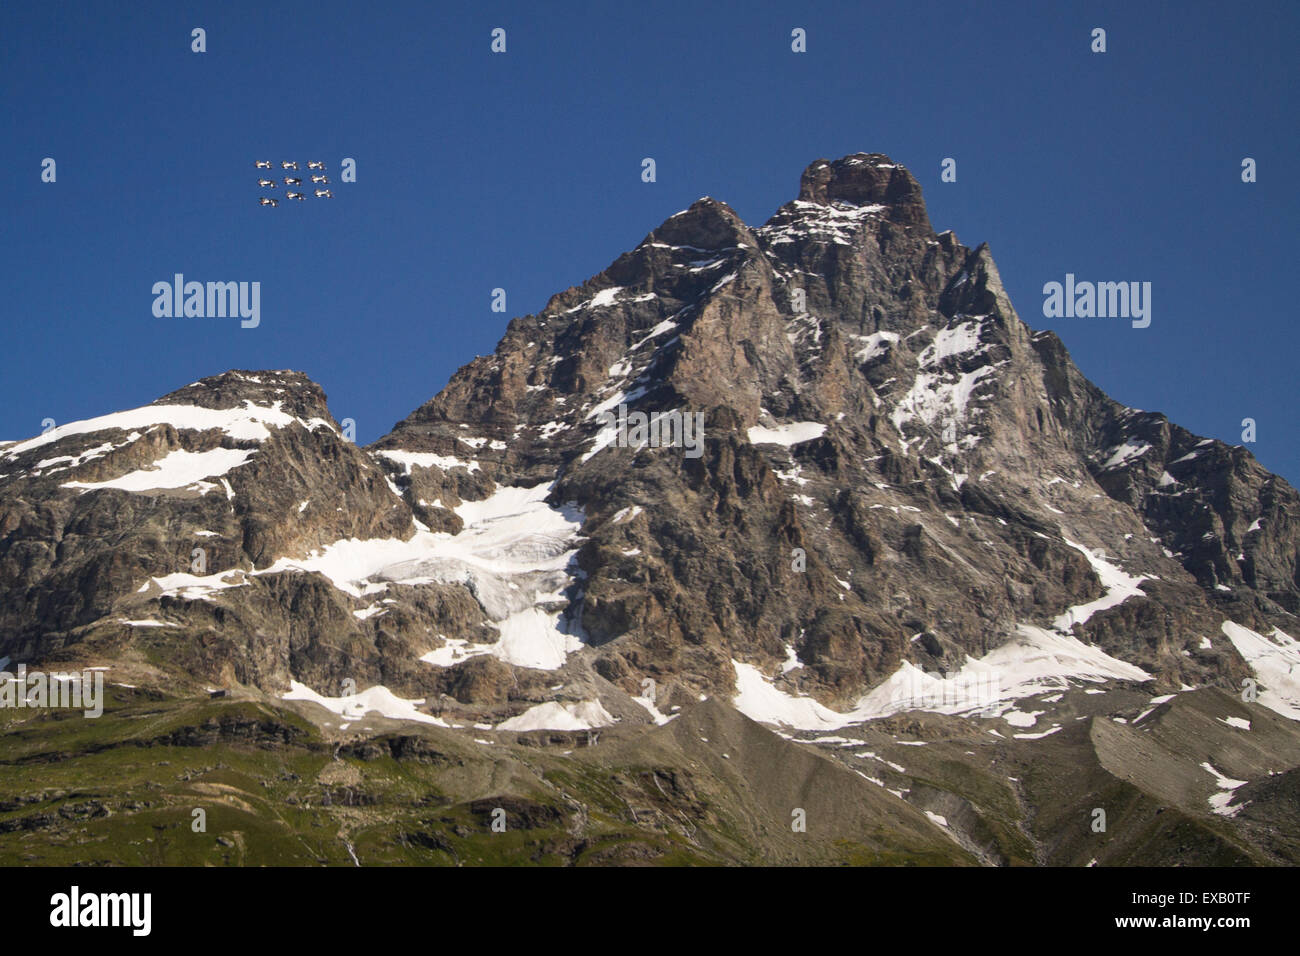 Cervinia, Italy. 10th July 2015. The acrobatic team 'Frecce Tricolori' of the Italian Air Force fly by Matterhorn (Italian name Cervino) in Aosta Valley, (Italy) to celebrate the 150 years of the first ascent. Stock Photo